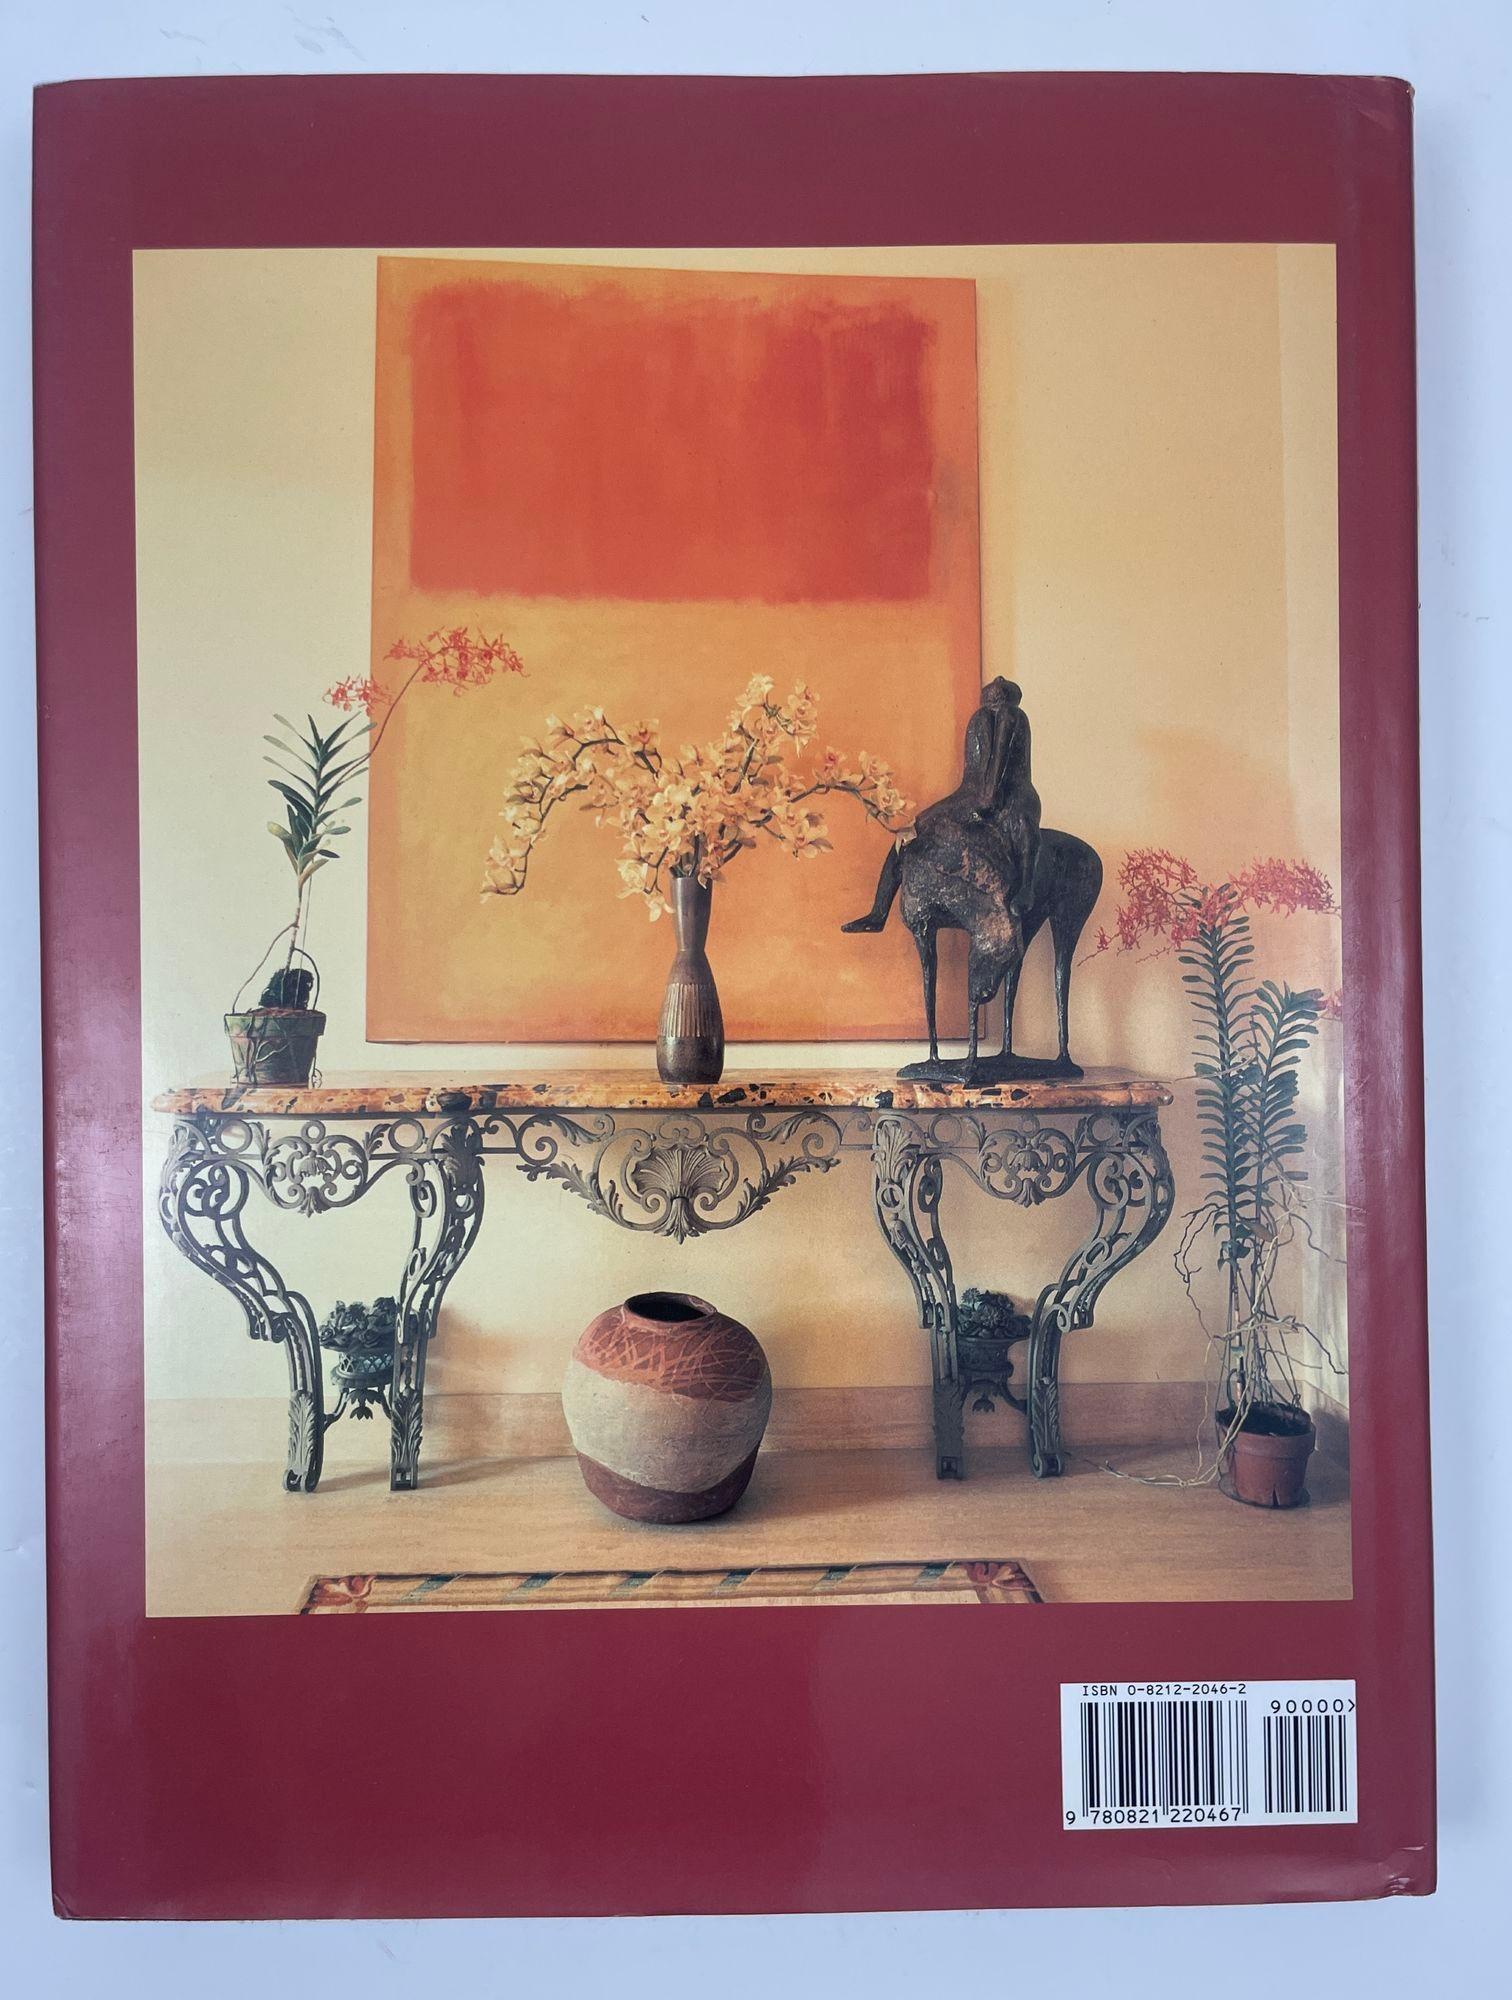 American Horst Interiors by Barbara Plumb Hardcover Book 1993 First Edition For Sale